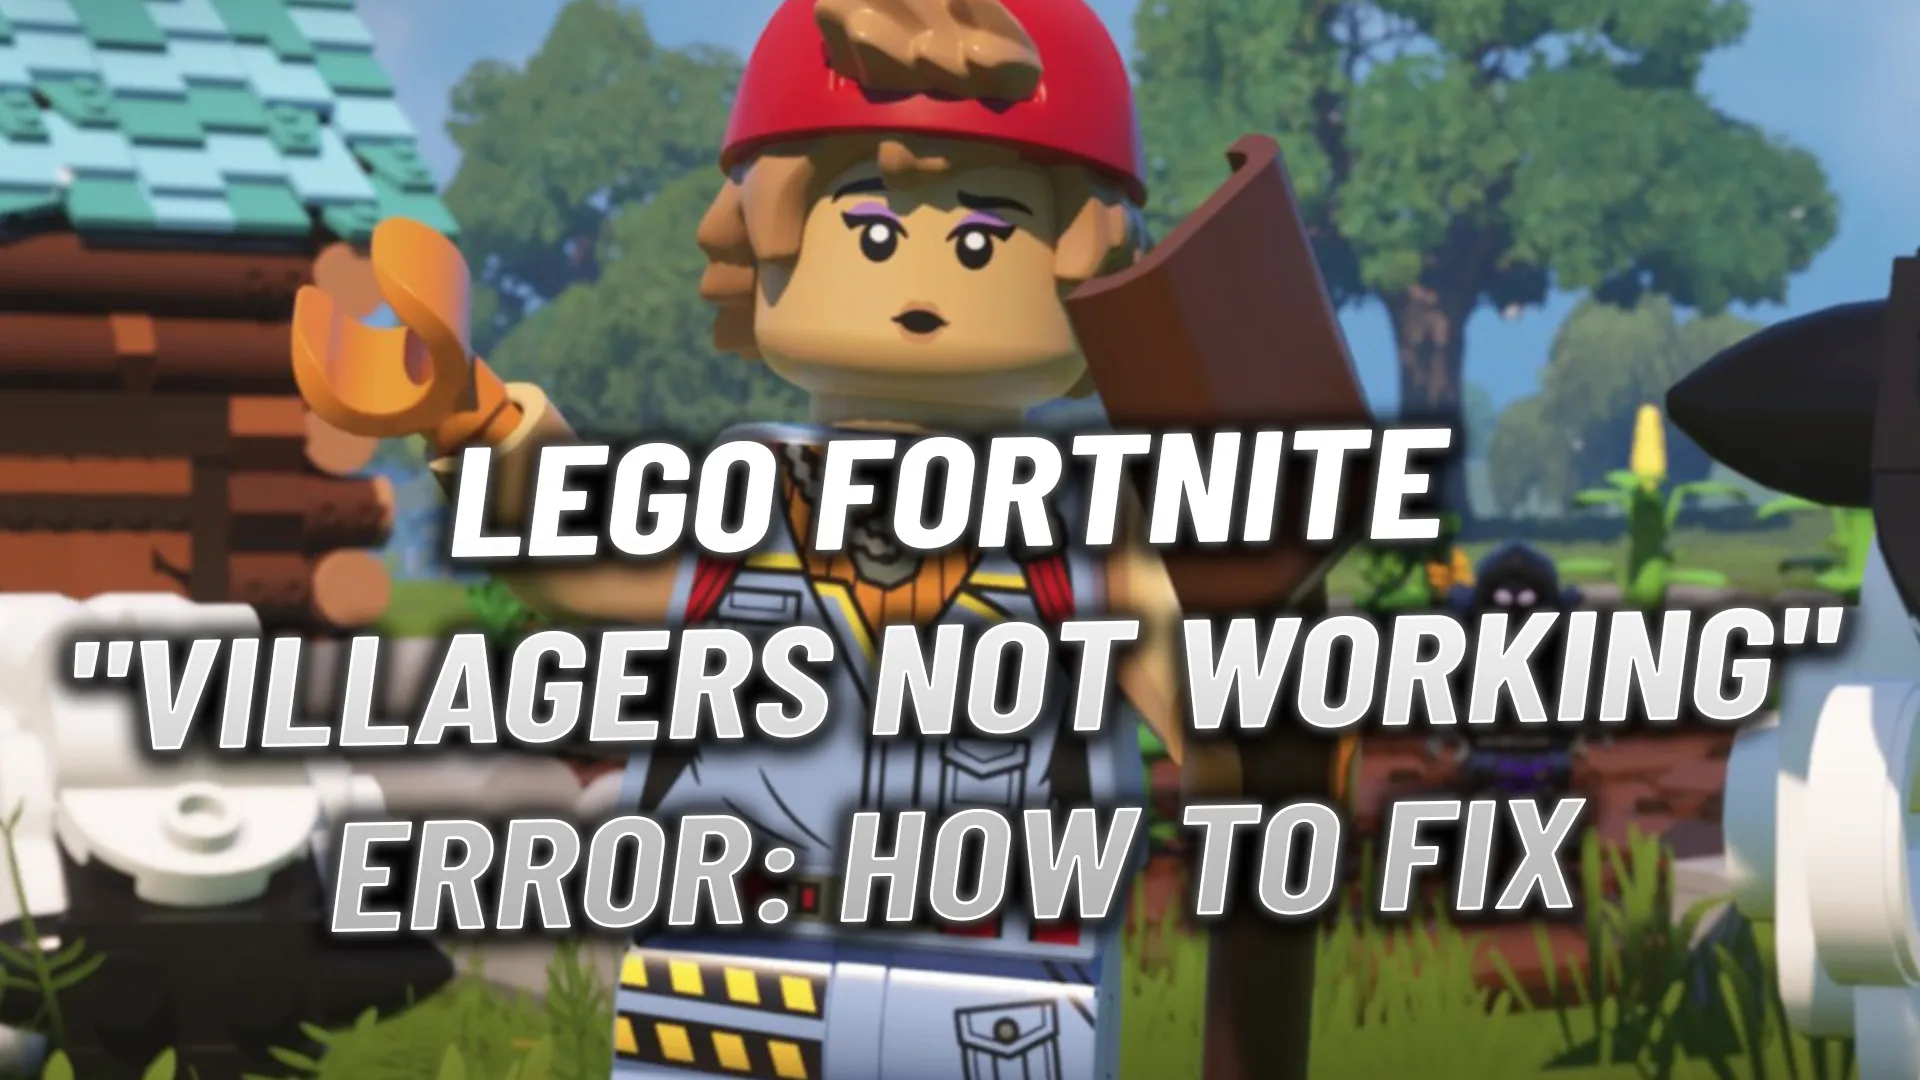 How to Fix World Currently Unavailable Error in Lego Fortnite?